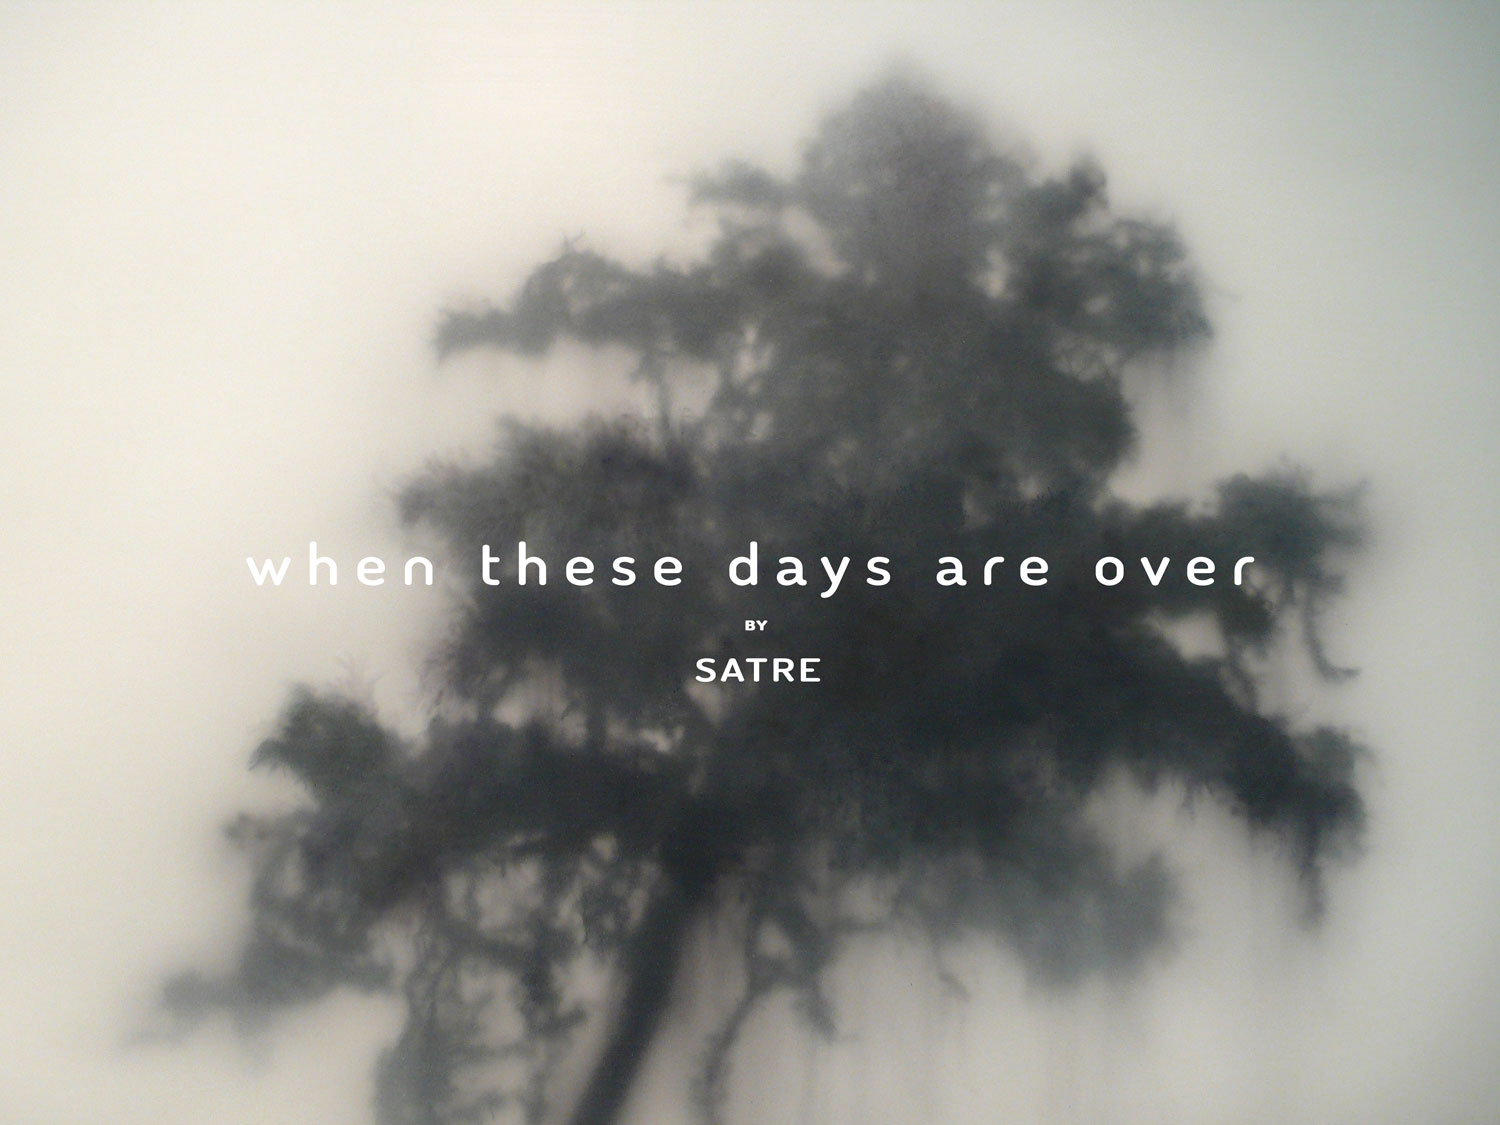 When-these-days-are-over-front-1500-geir-satre.jpg